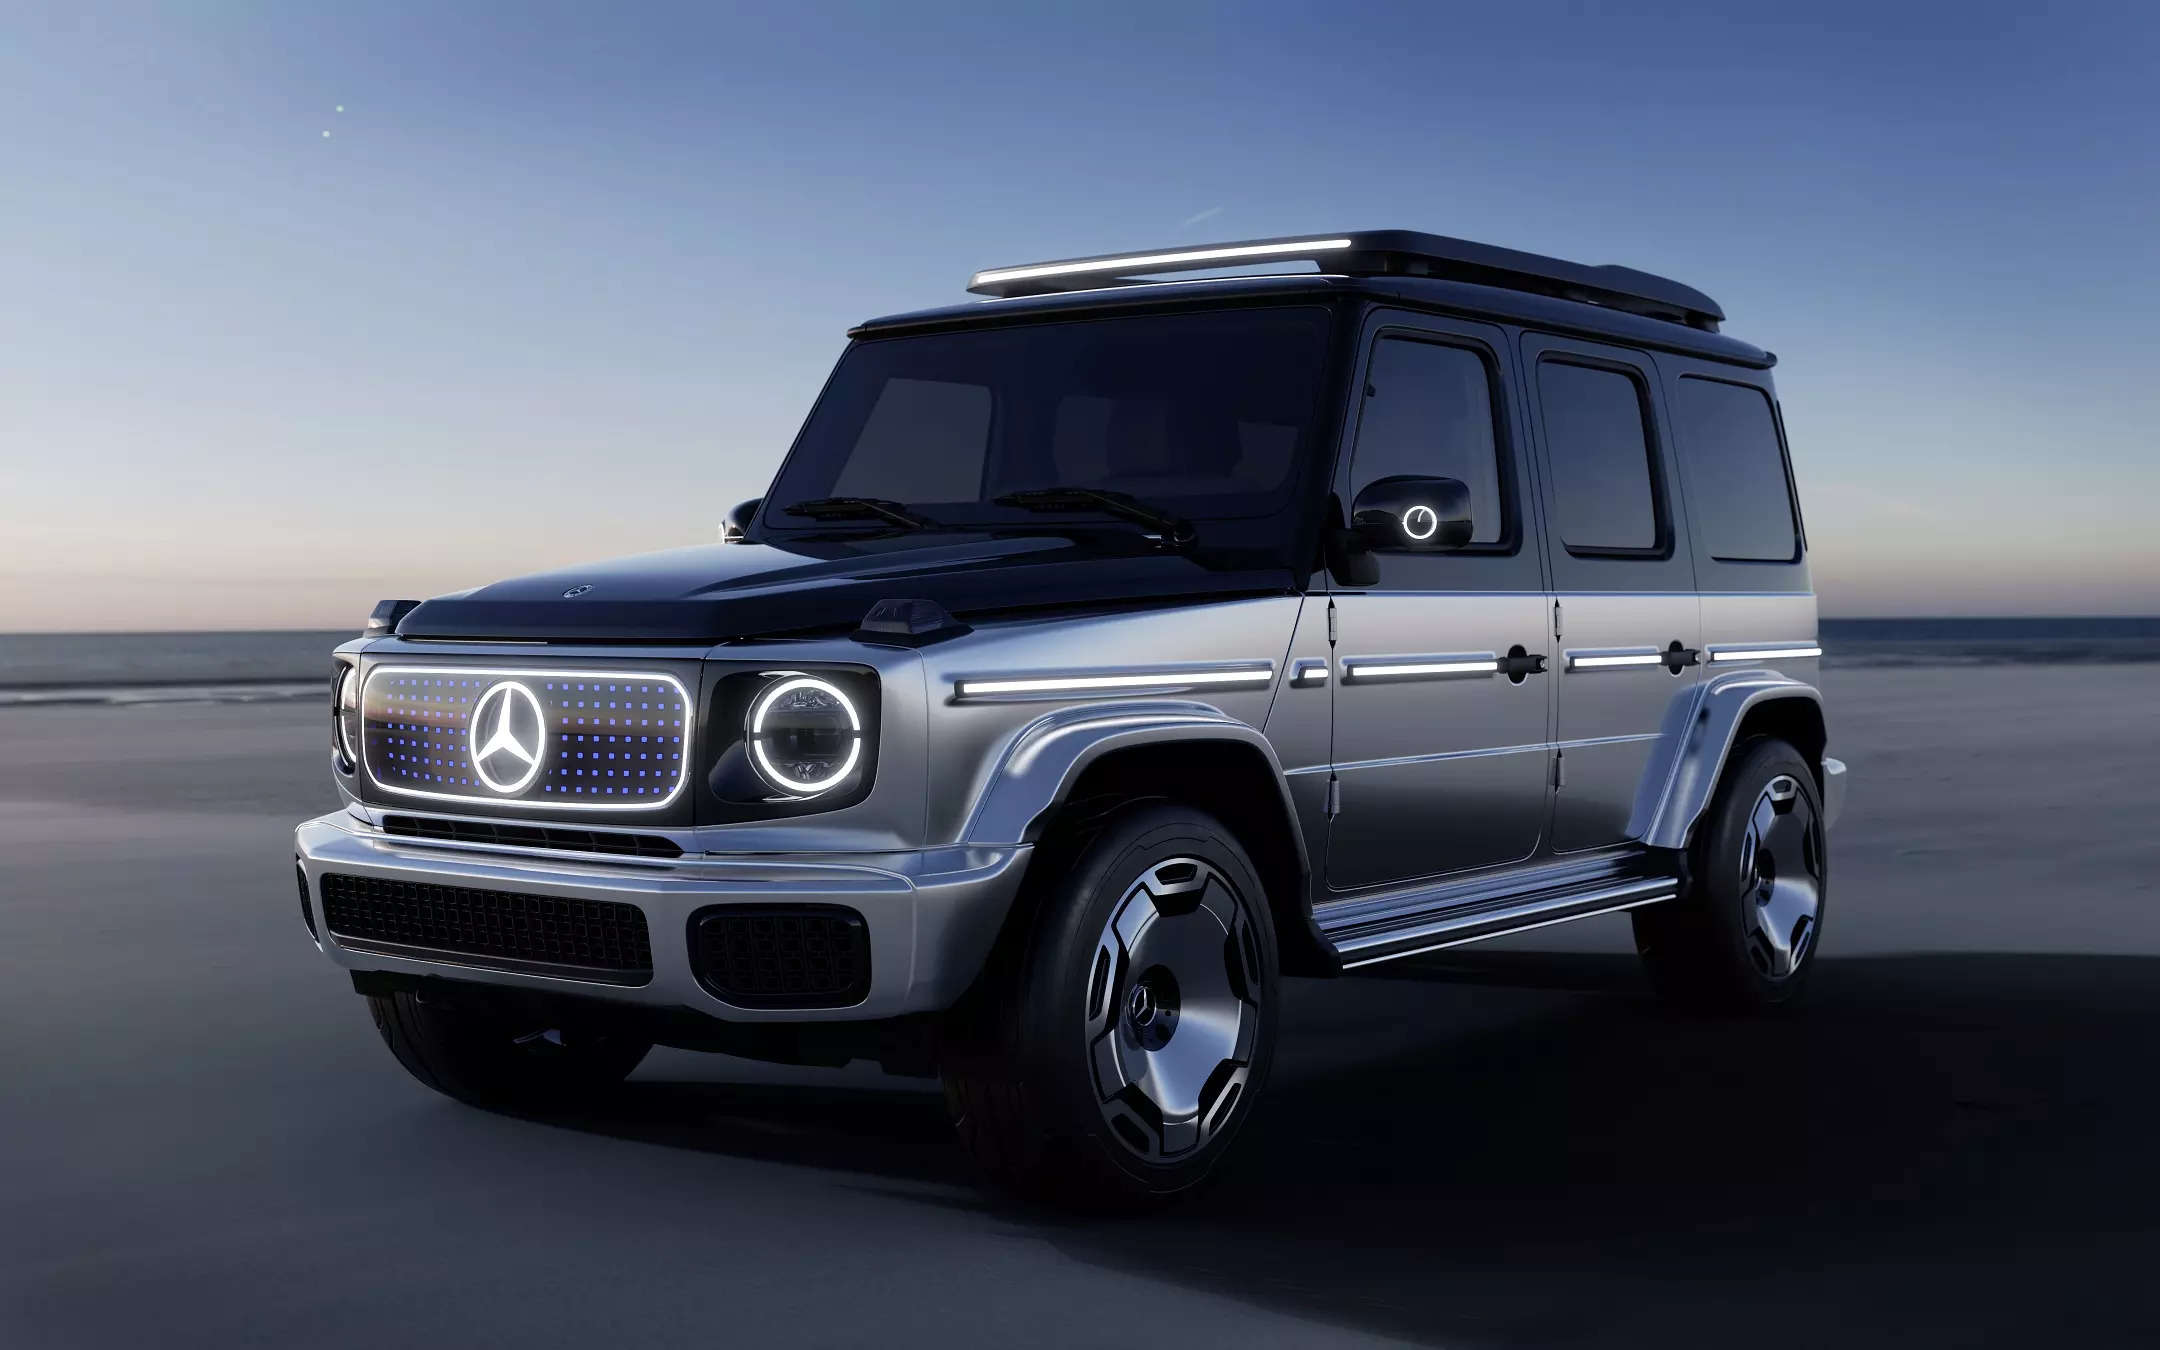 <p>The Concept EQG is Mercedes-Benz’s presentation of a near-production study of an all-electric model variant of its utilitarian off-road icon. </p>